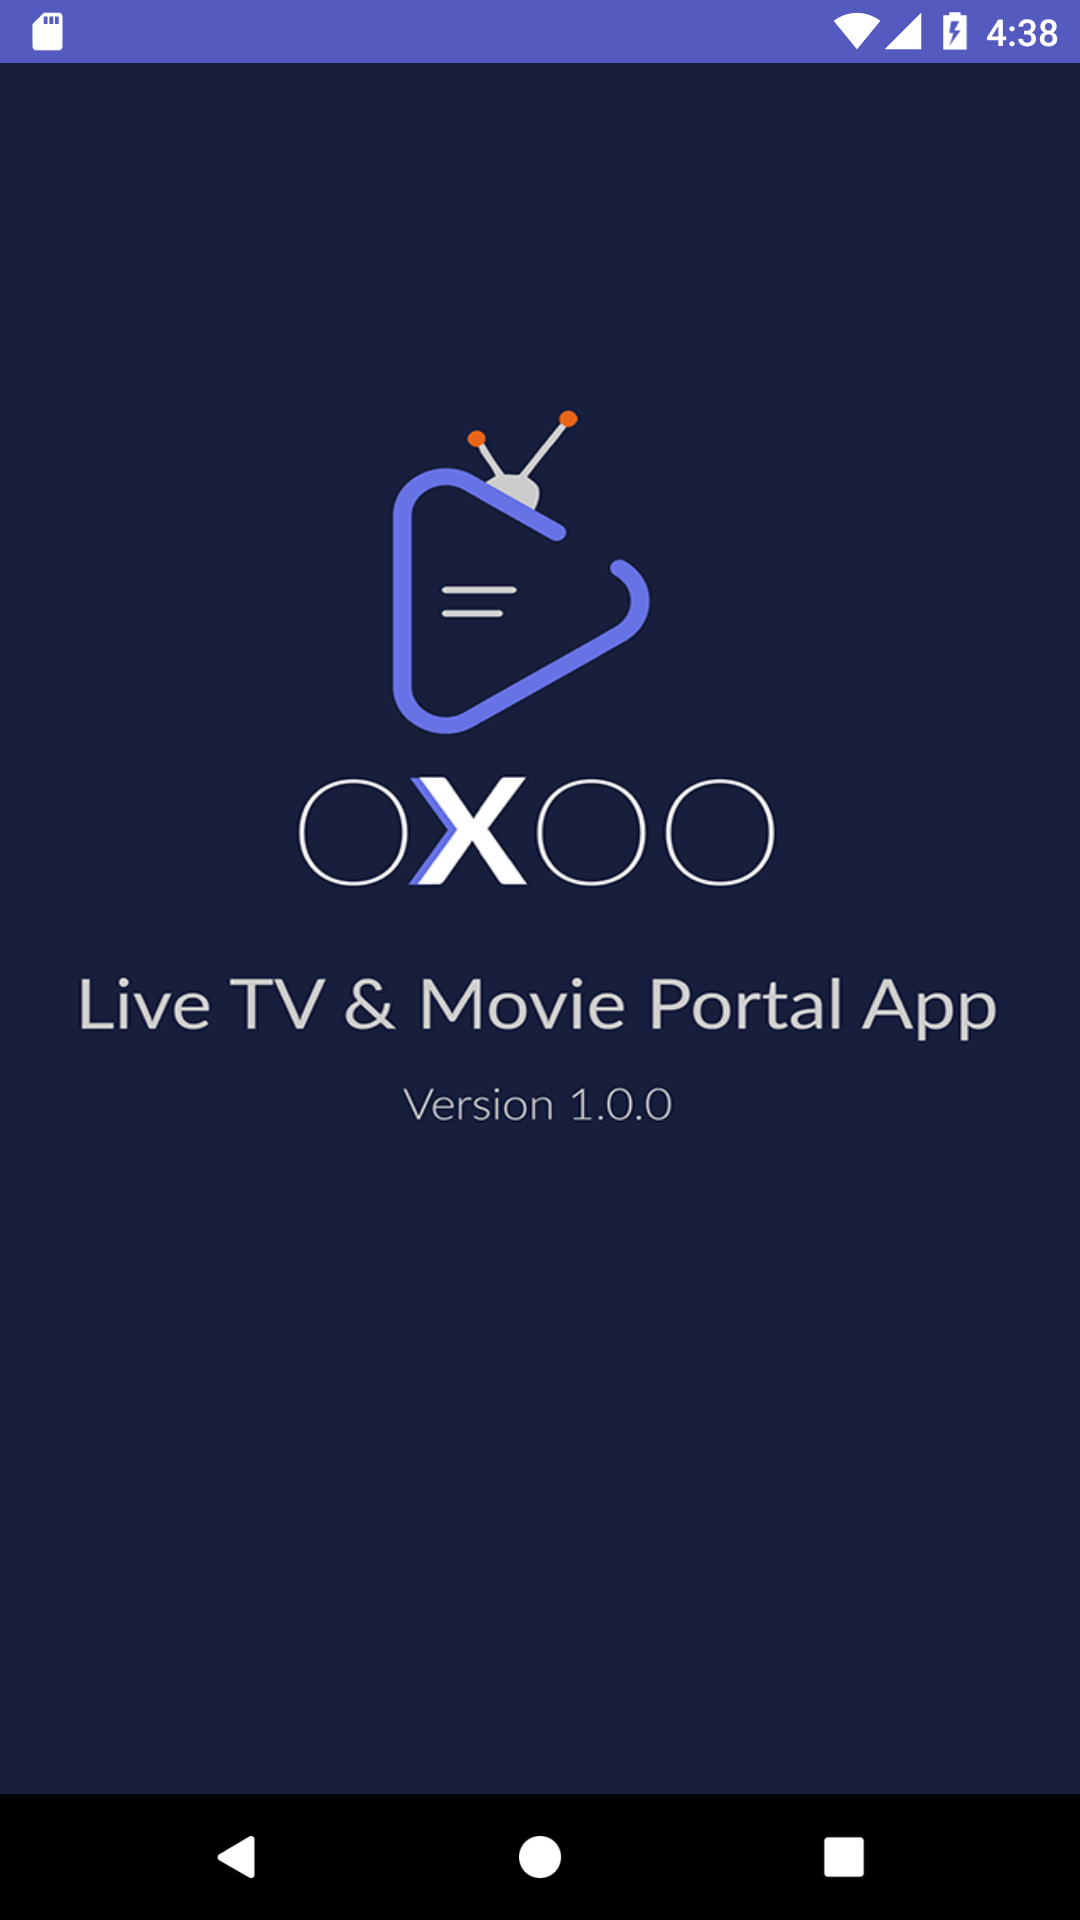 OXOO - Android Live TV & Movie Portal App